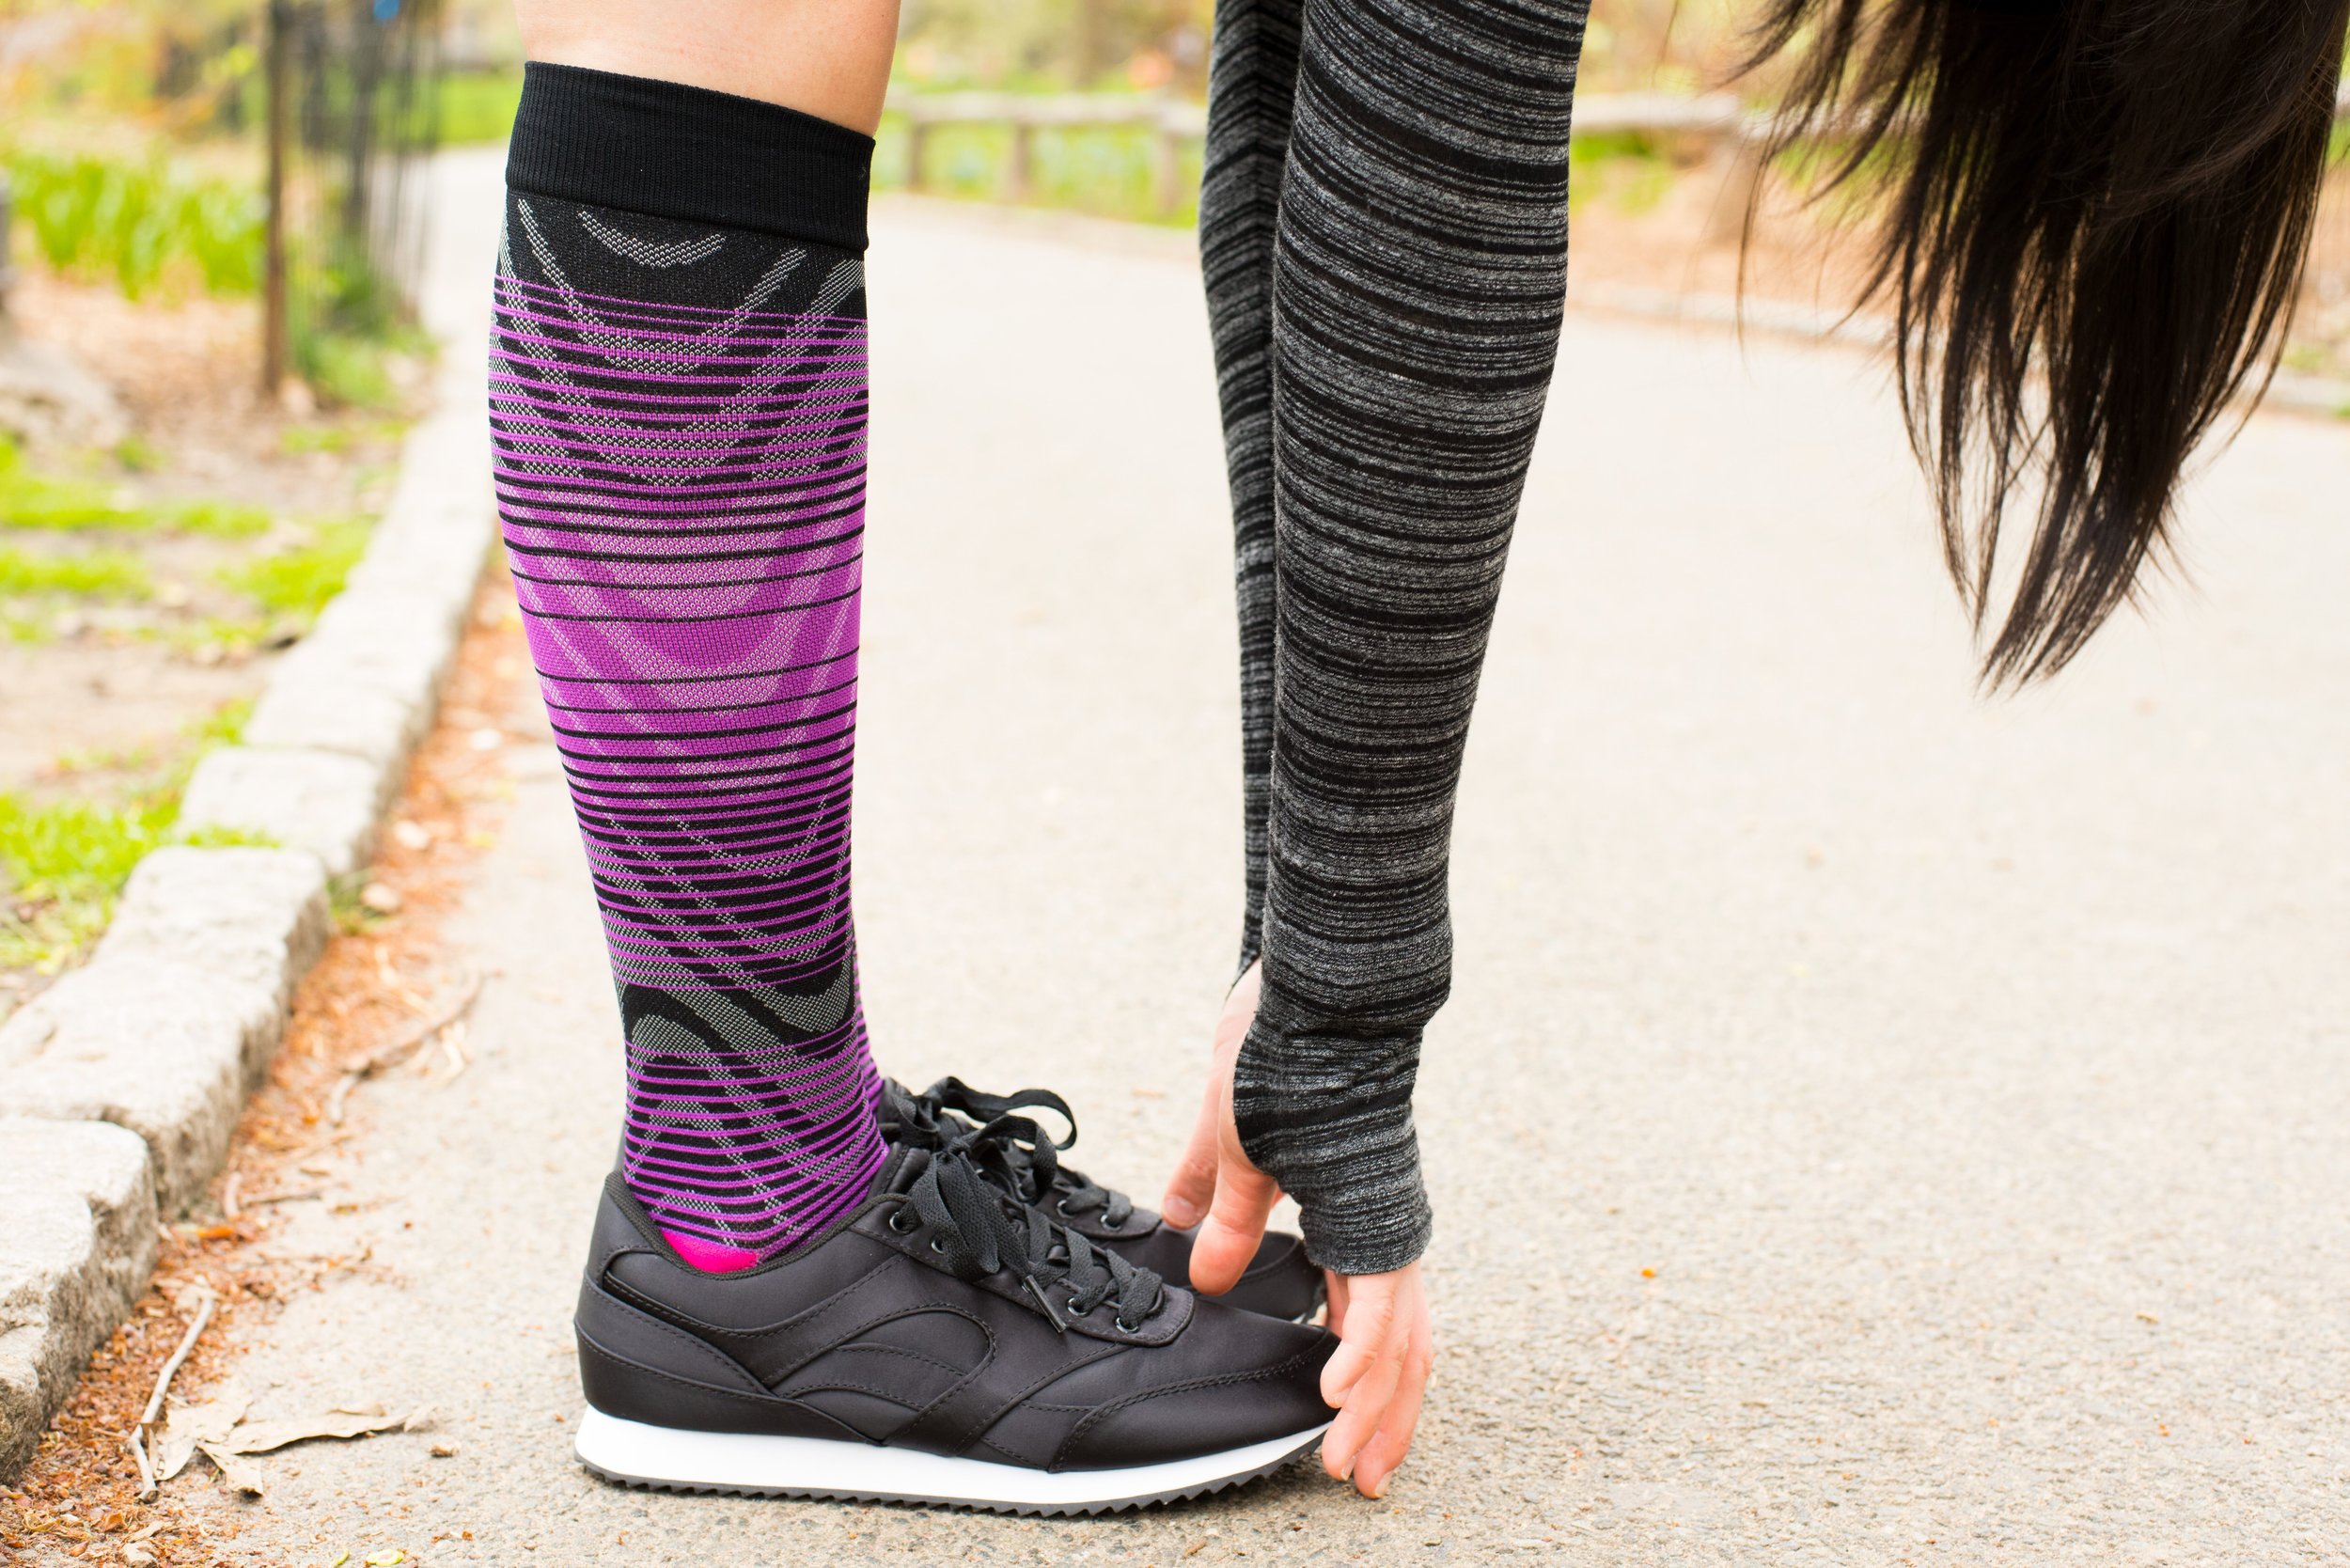 Benefits of Compression Socks for Running